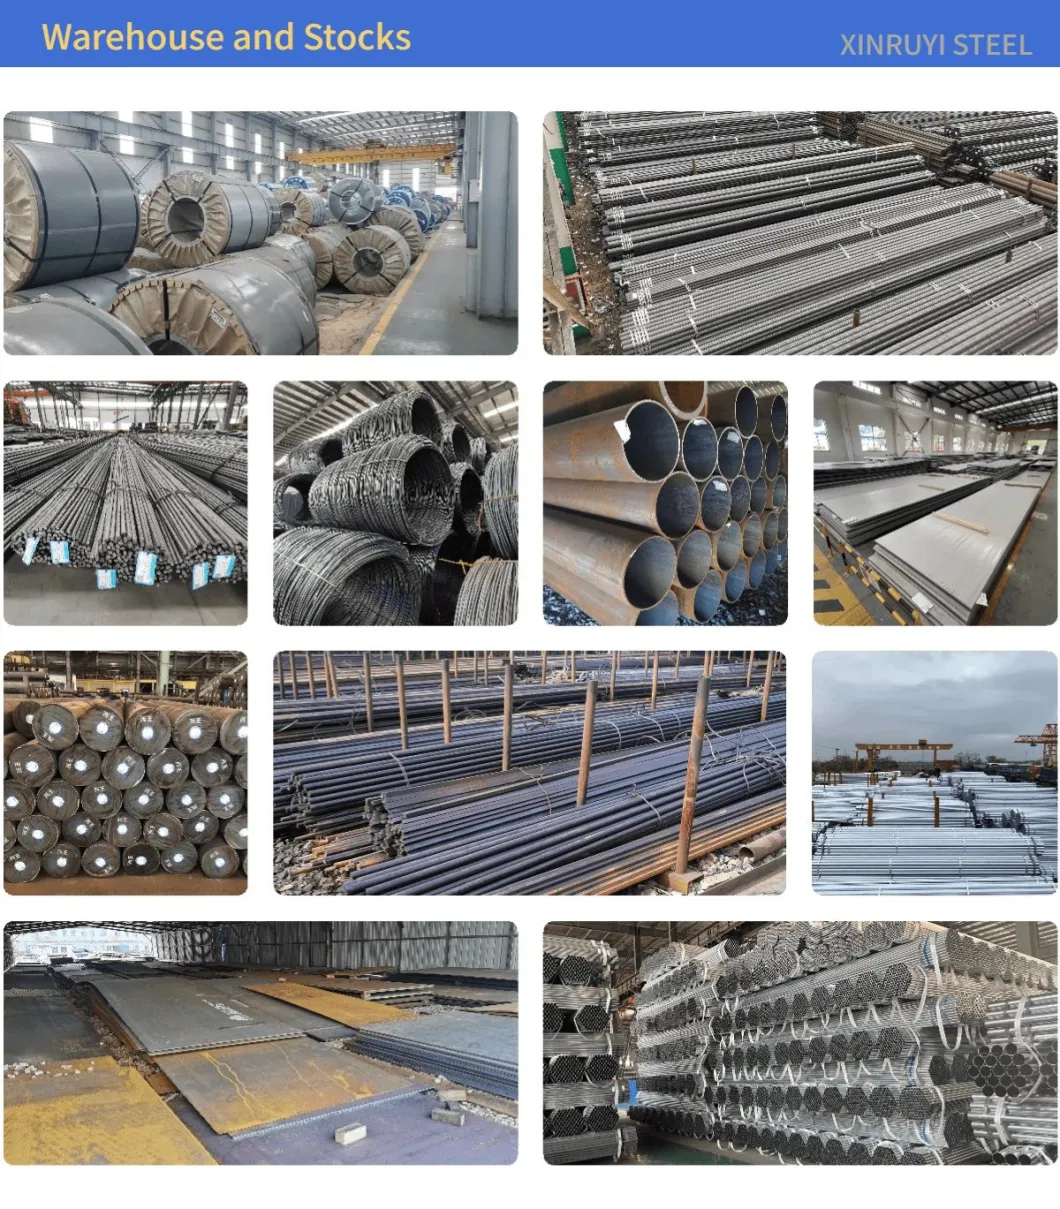 Atsm A53 A106 B API 5L B Pipe Line Casing Tube Fluid/Oil/Gas Transportation Pipe with High Guality Zinc Coating